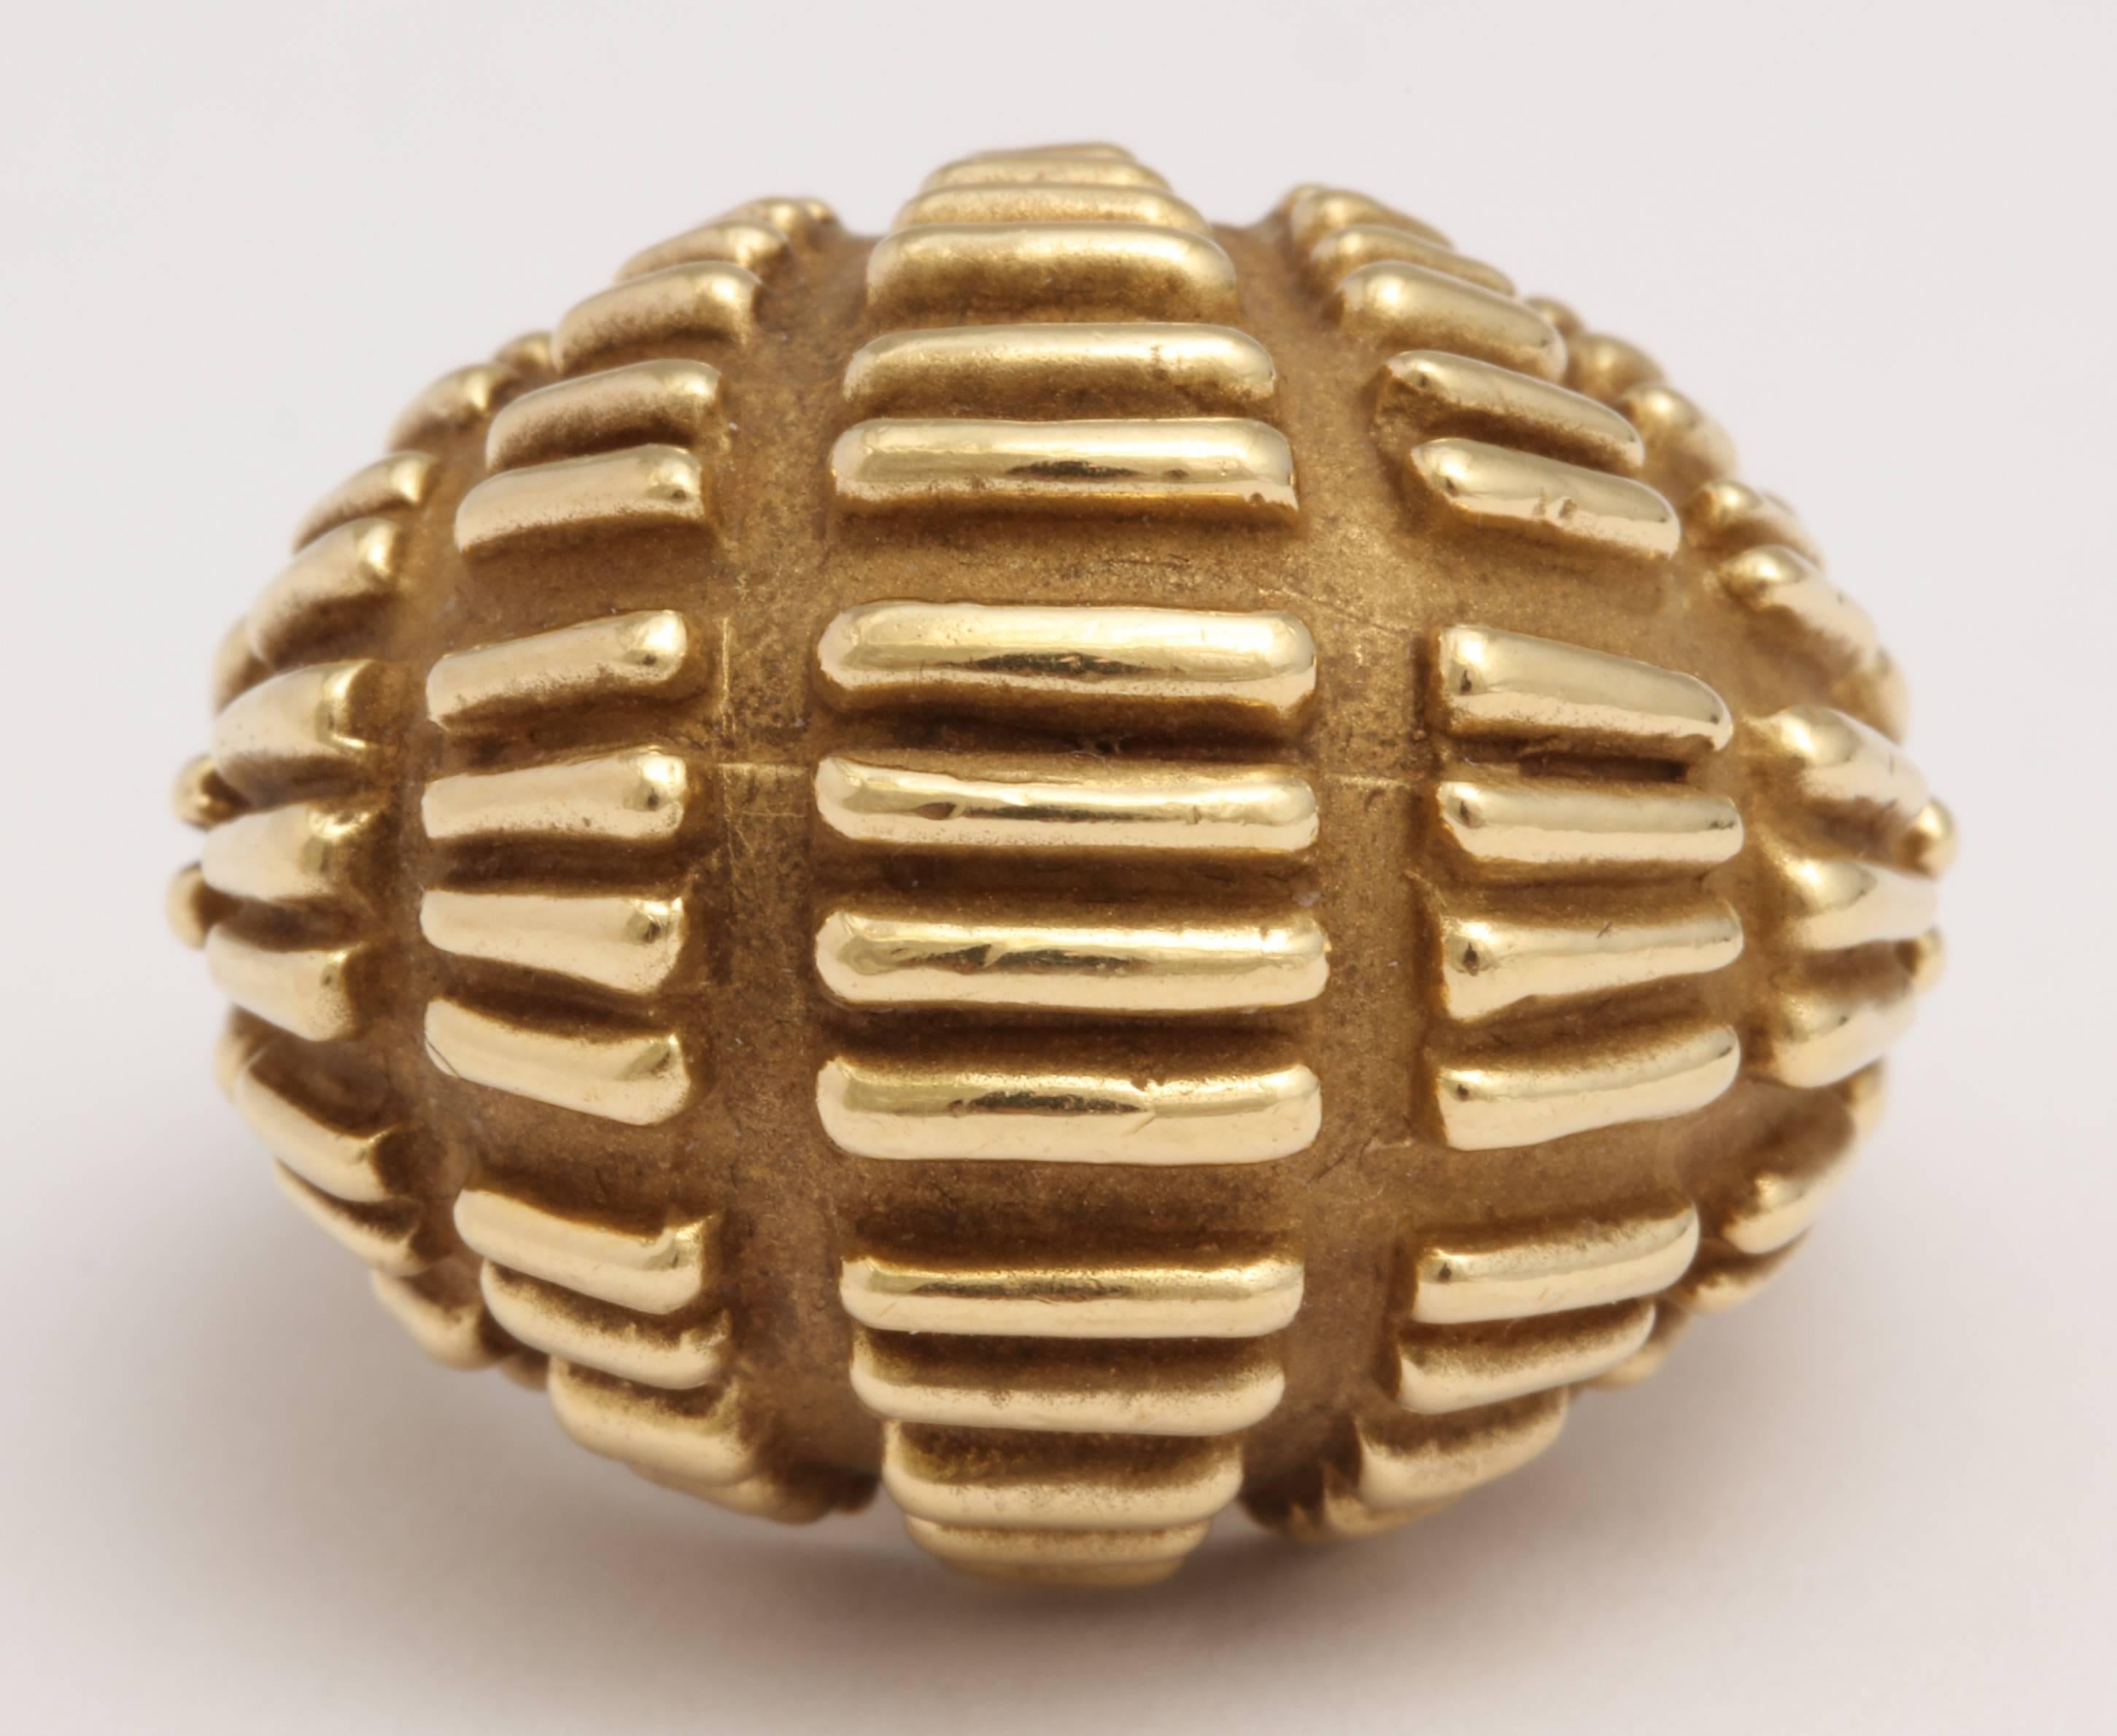 18kt  Yellow Gold Bombe Ring with 2 Textures - matte & polished and featuring Raised ridges to give this Ring a very dramatic and powerful look. Ca 1950.